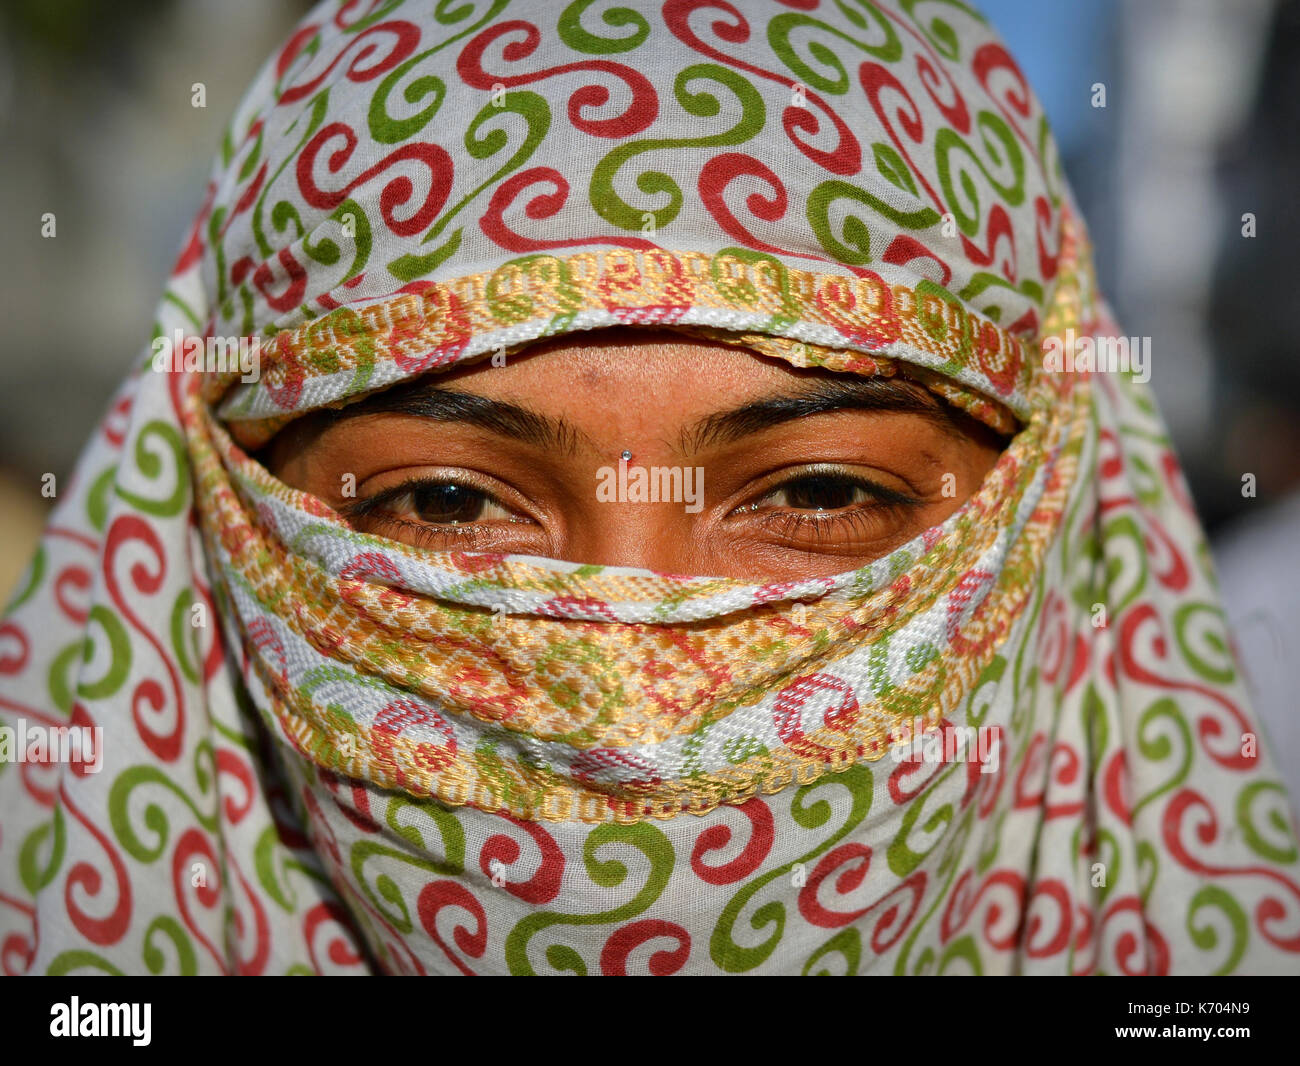 Young Indian woman with beautiful eyes covers her hair and face with a trendy secular, red-and-green headscarf and poses for the camera. Stock Photo